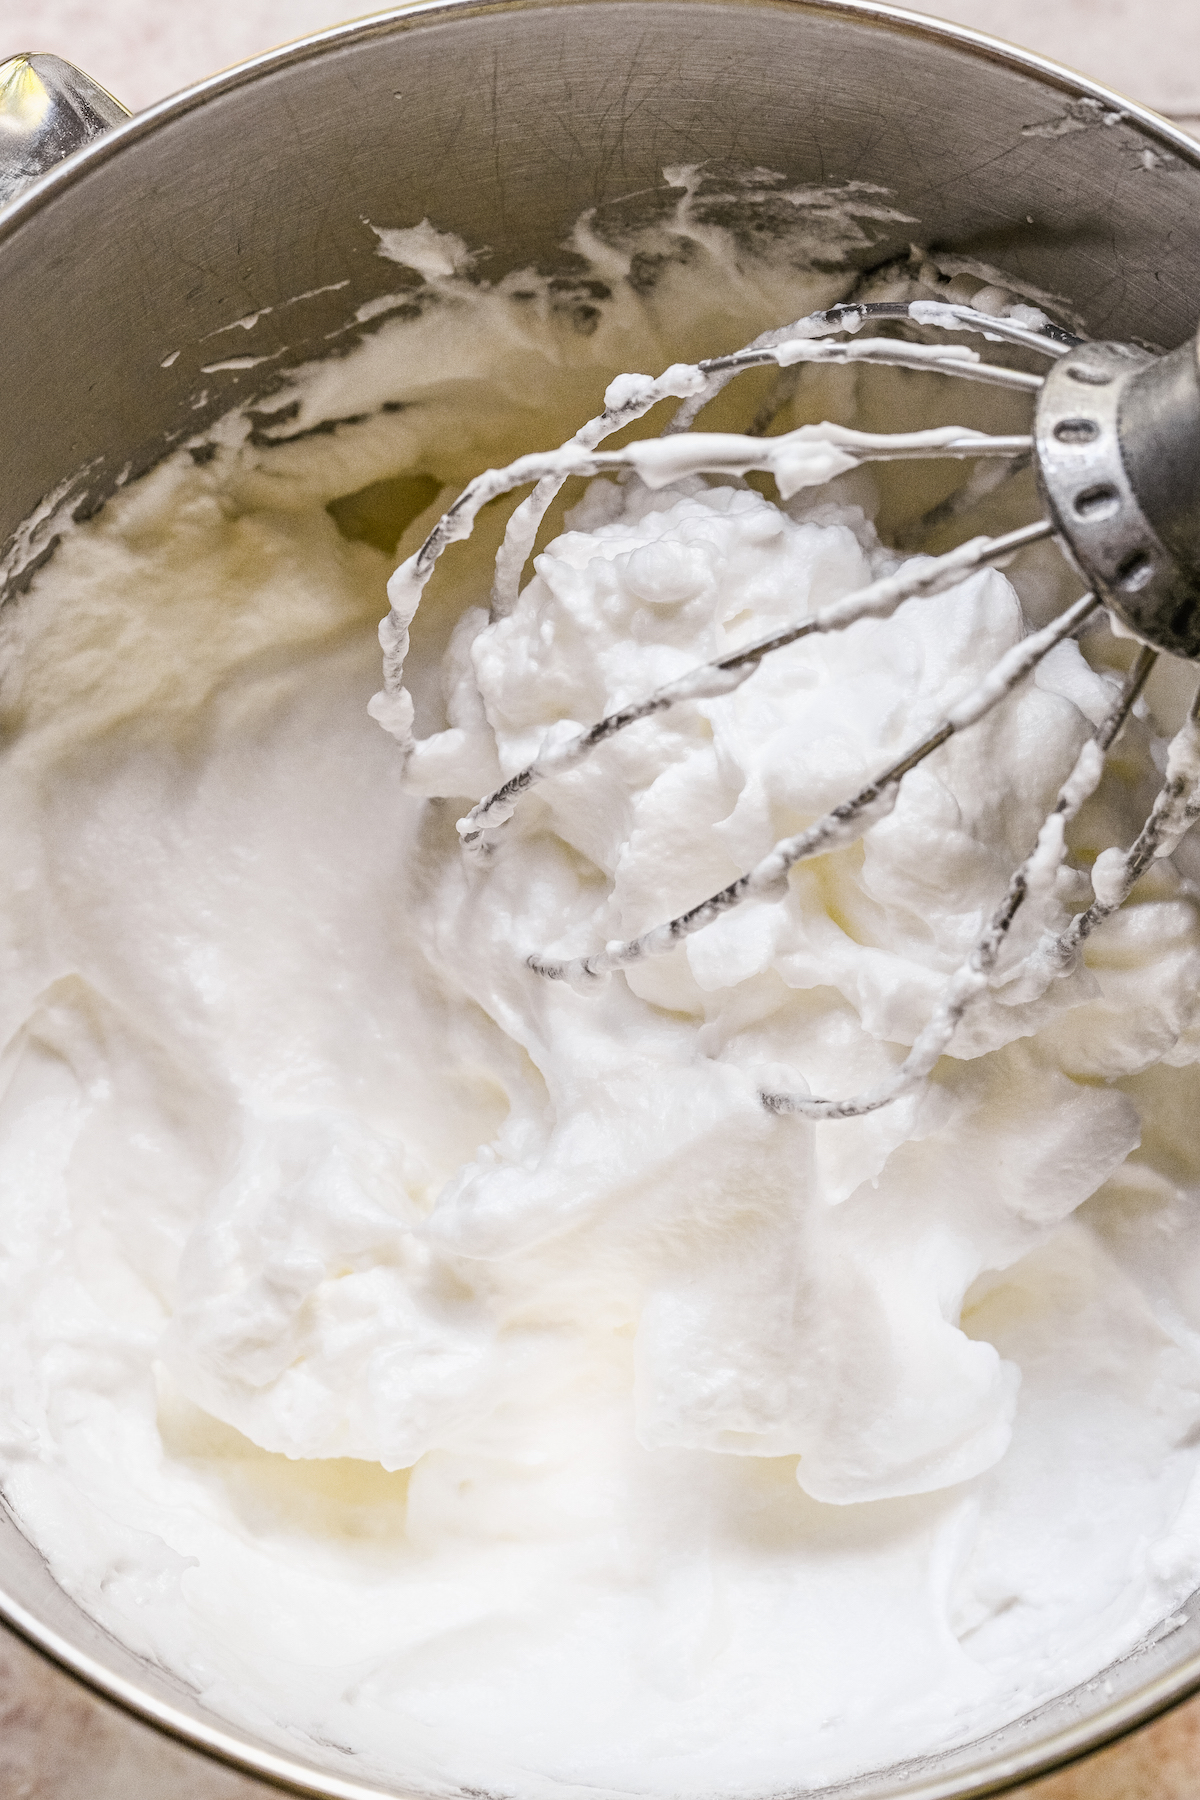 Egg whites beaten into loose peaks with the whisk attachment in the bowl.